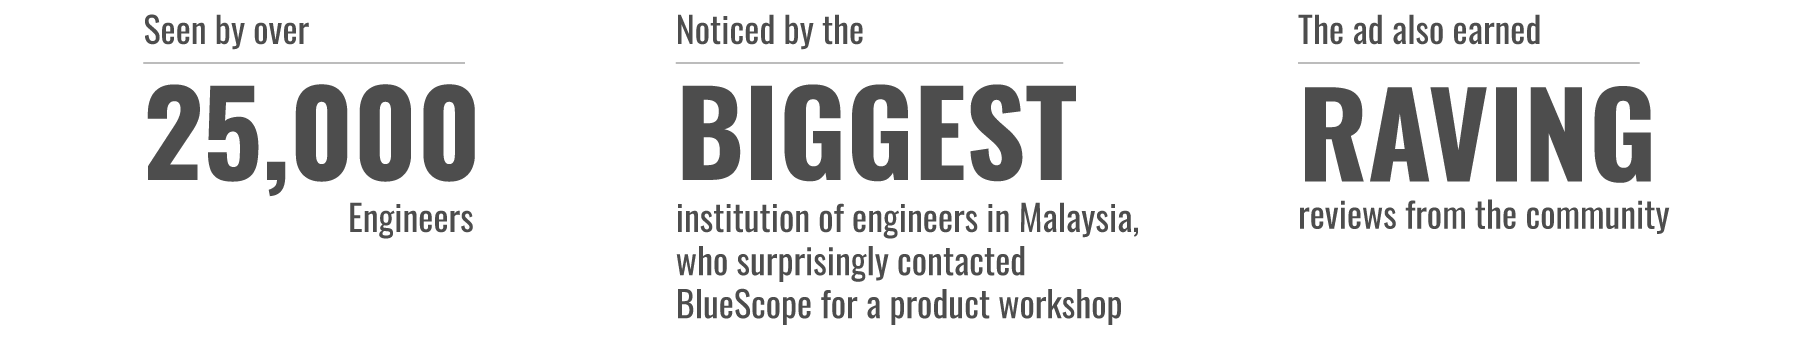 Seen by over 25,000 Engineers | Noticed by the BIGGEST instituition of engineers in Malaysia, who surprisingly contacted BlueScope for a product workshop | The ad also earned RAVING reviews fro the top management of BlueScope